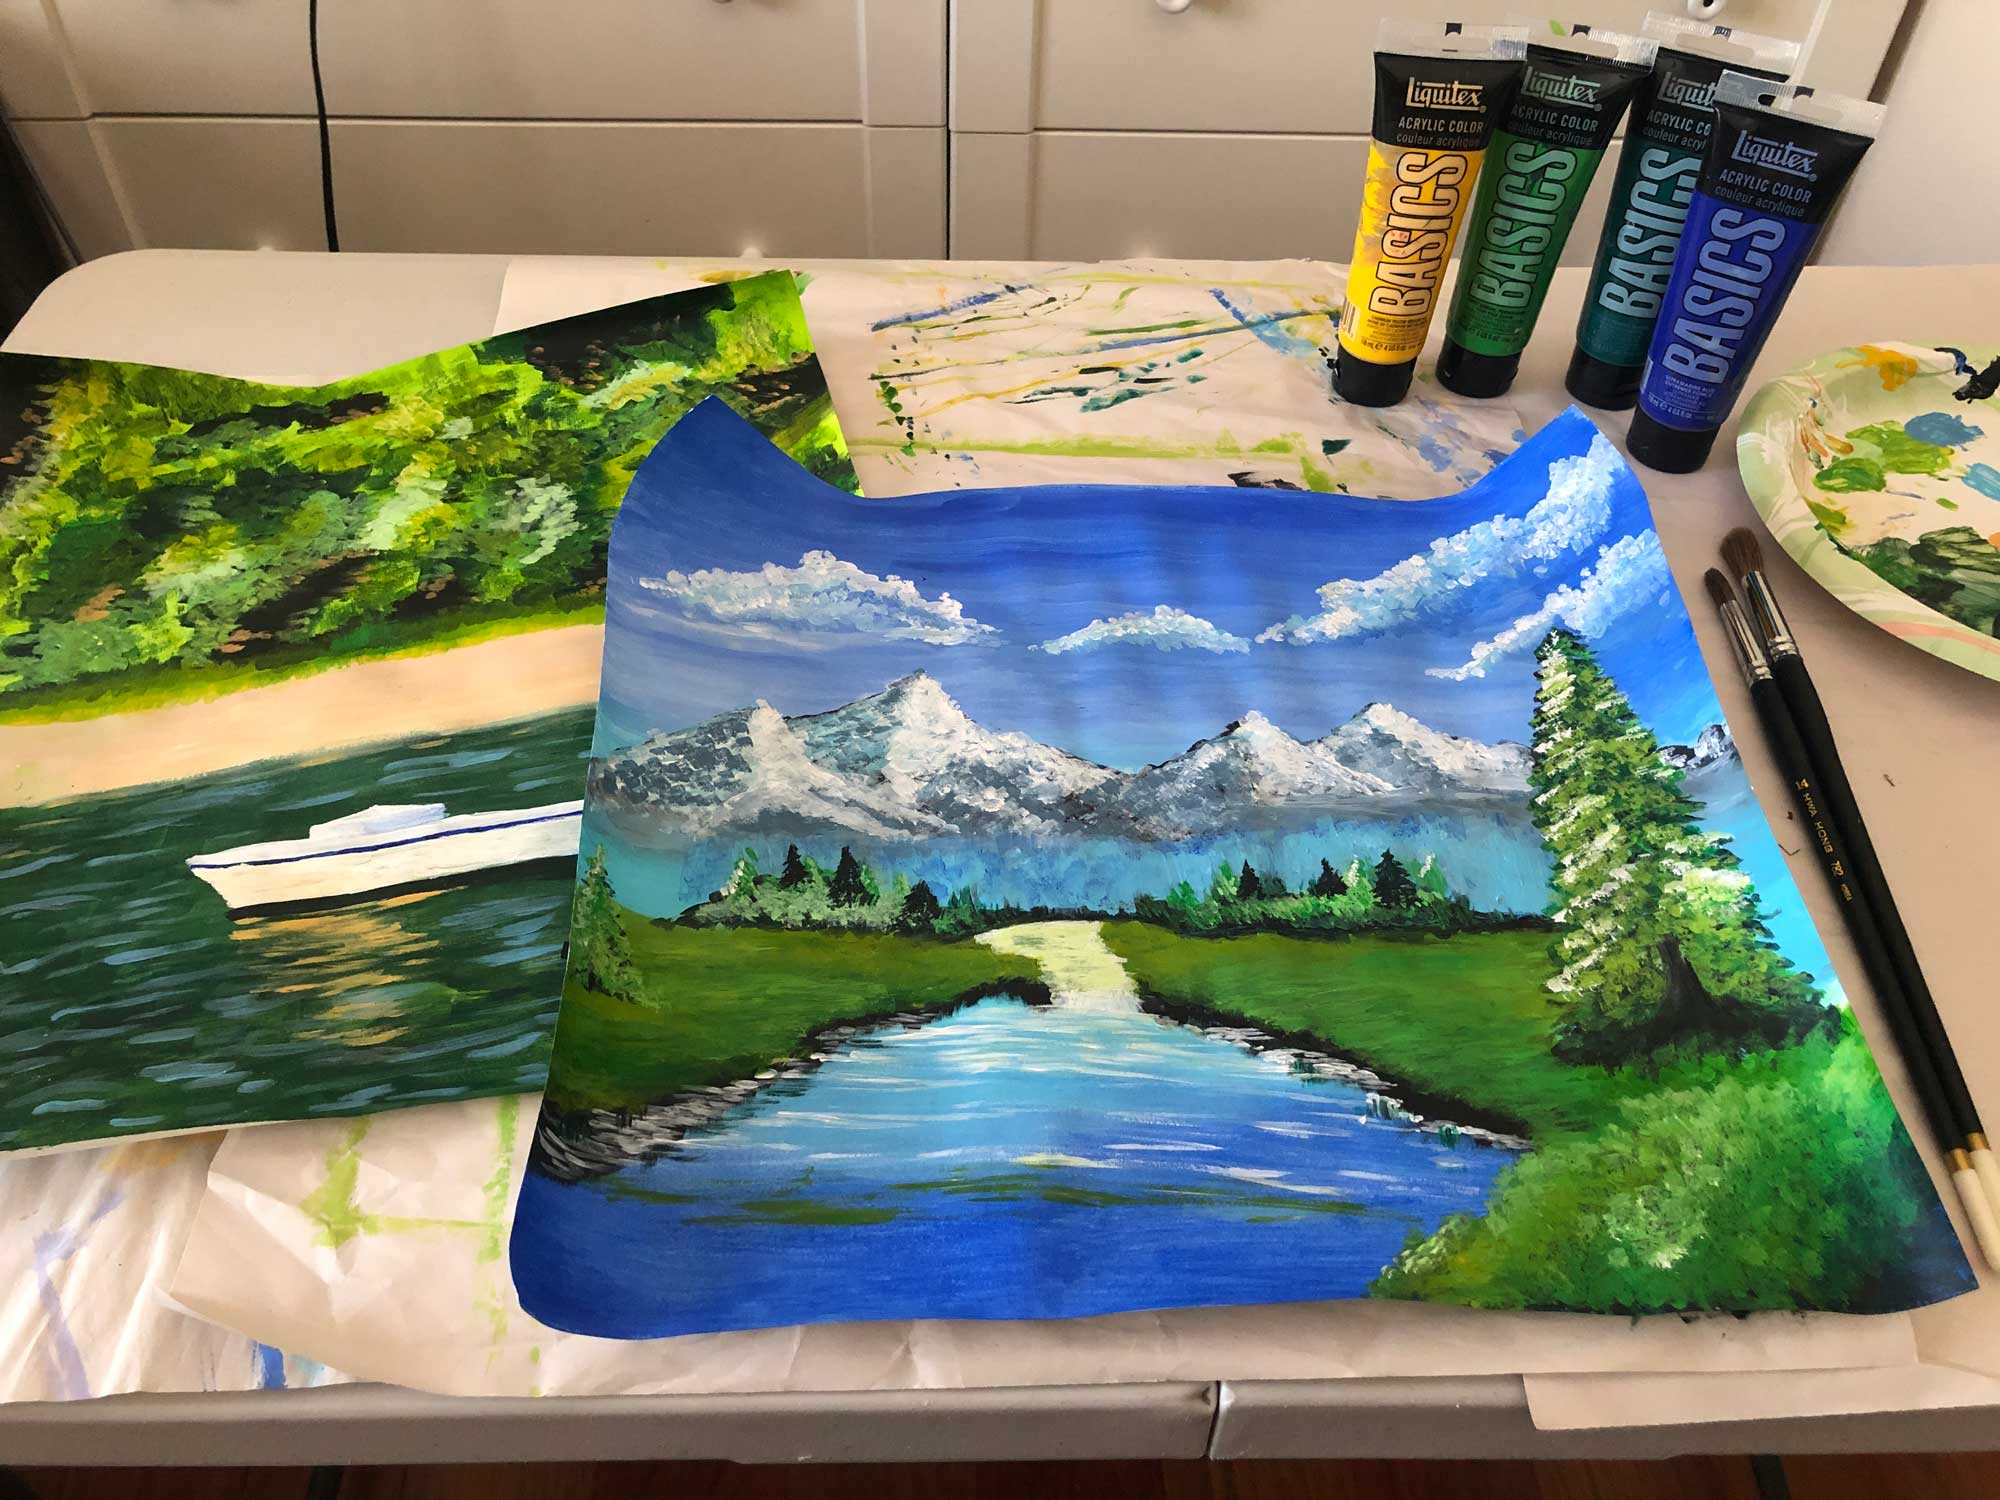 Acrylic paints next to painting of landscape